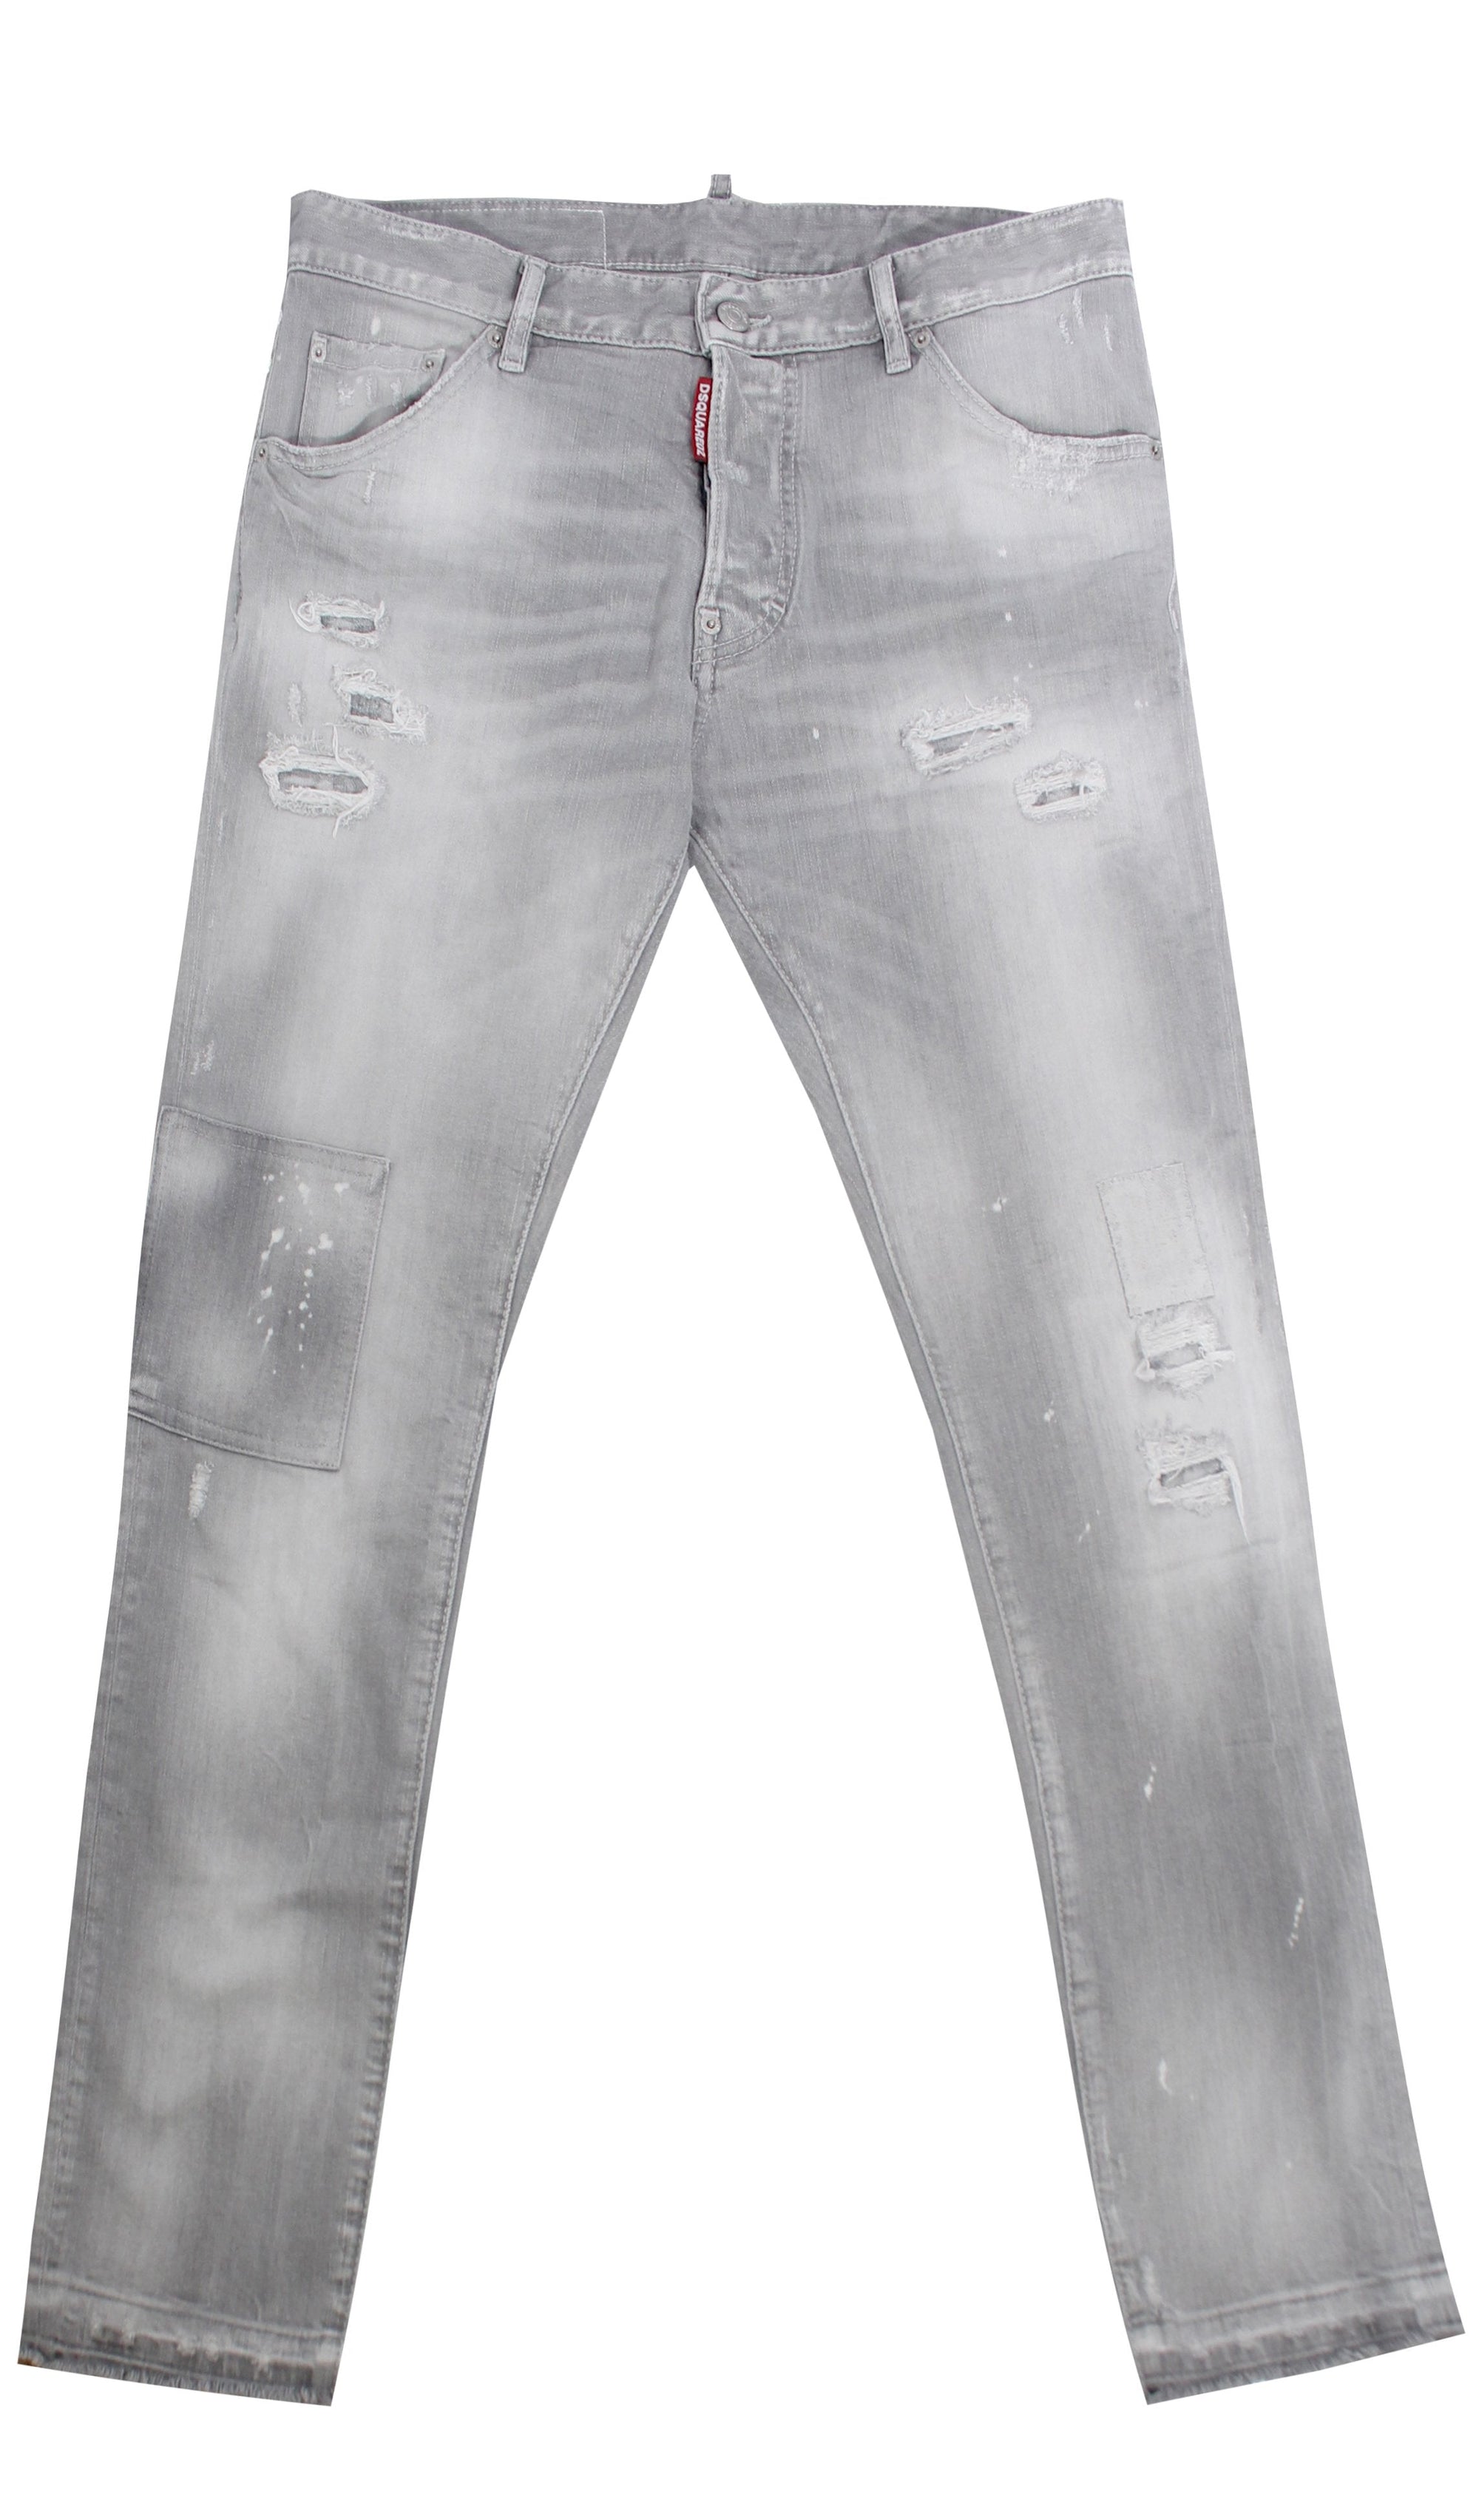 Cool Guy Cropped Jeans - Grey